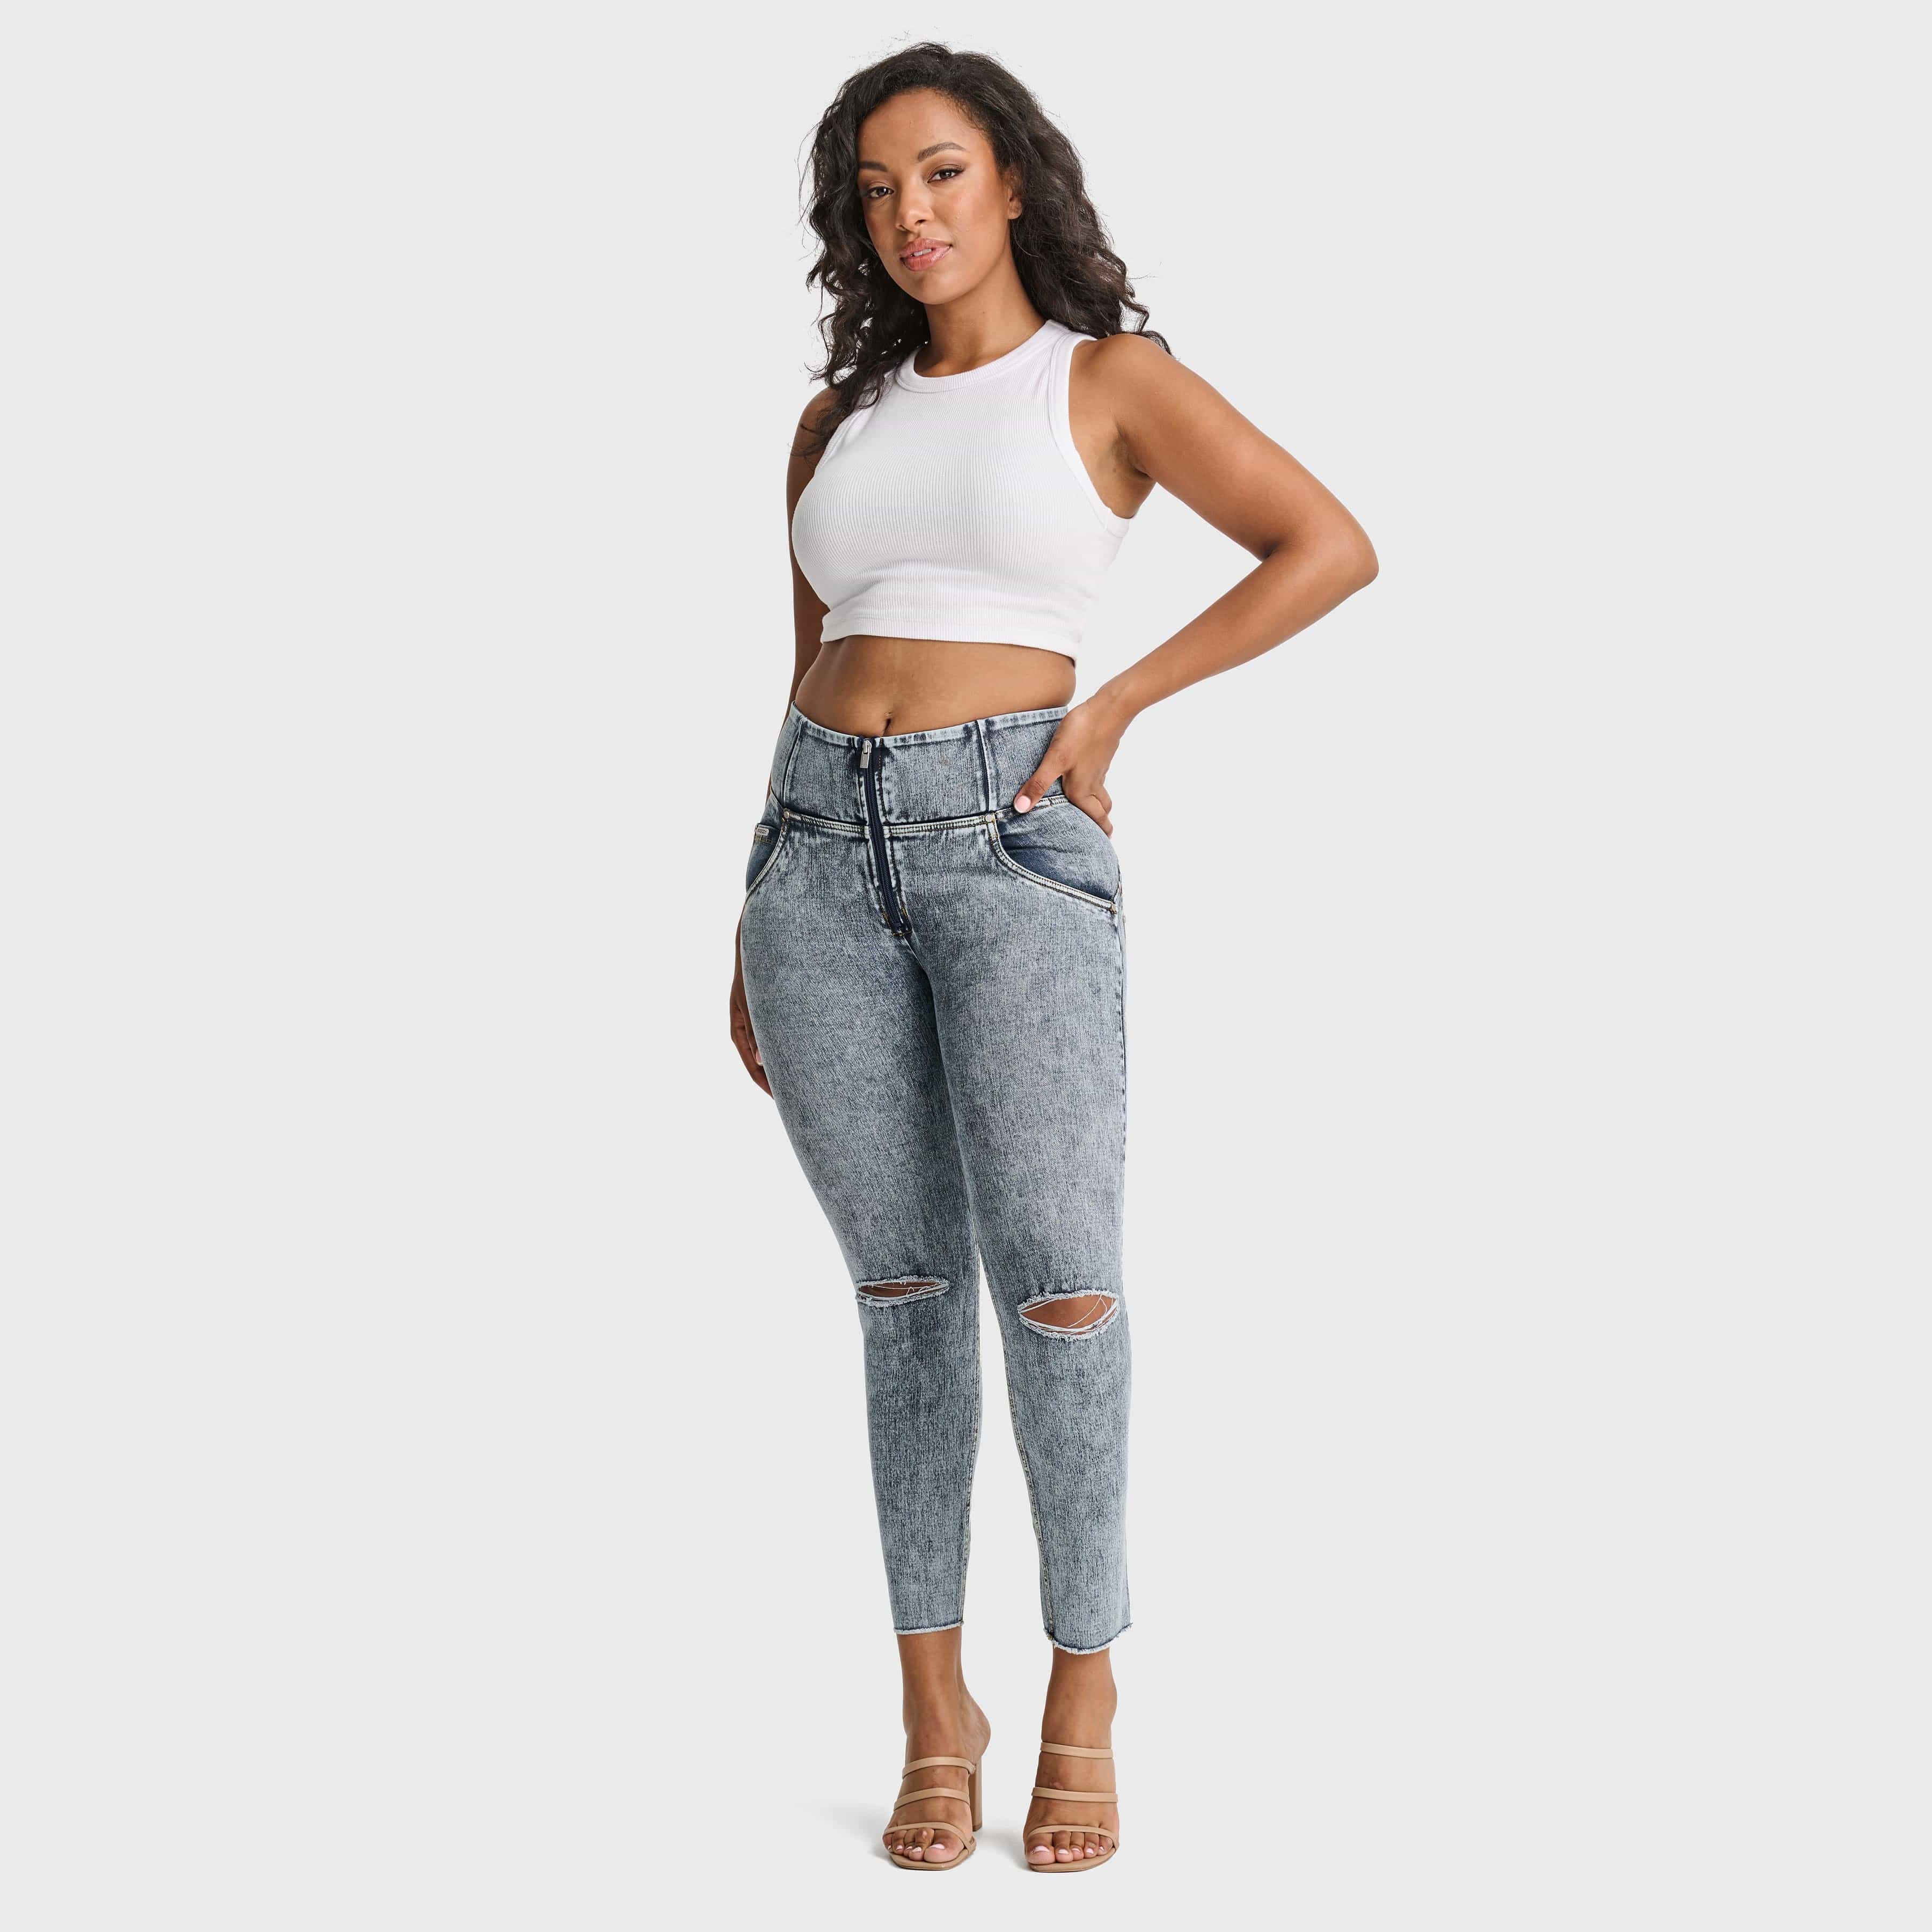 WR.UP® Snug Ripped Jeans - High Waisted - Petite Length - Blue Stonewash + Yellow Stitching 1